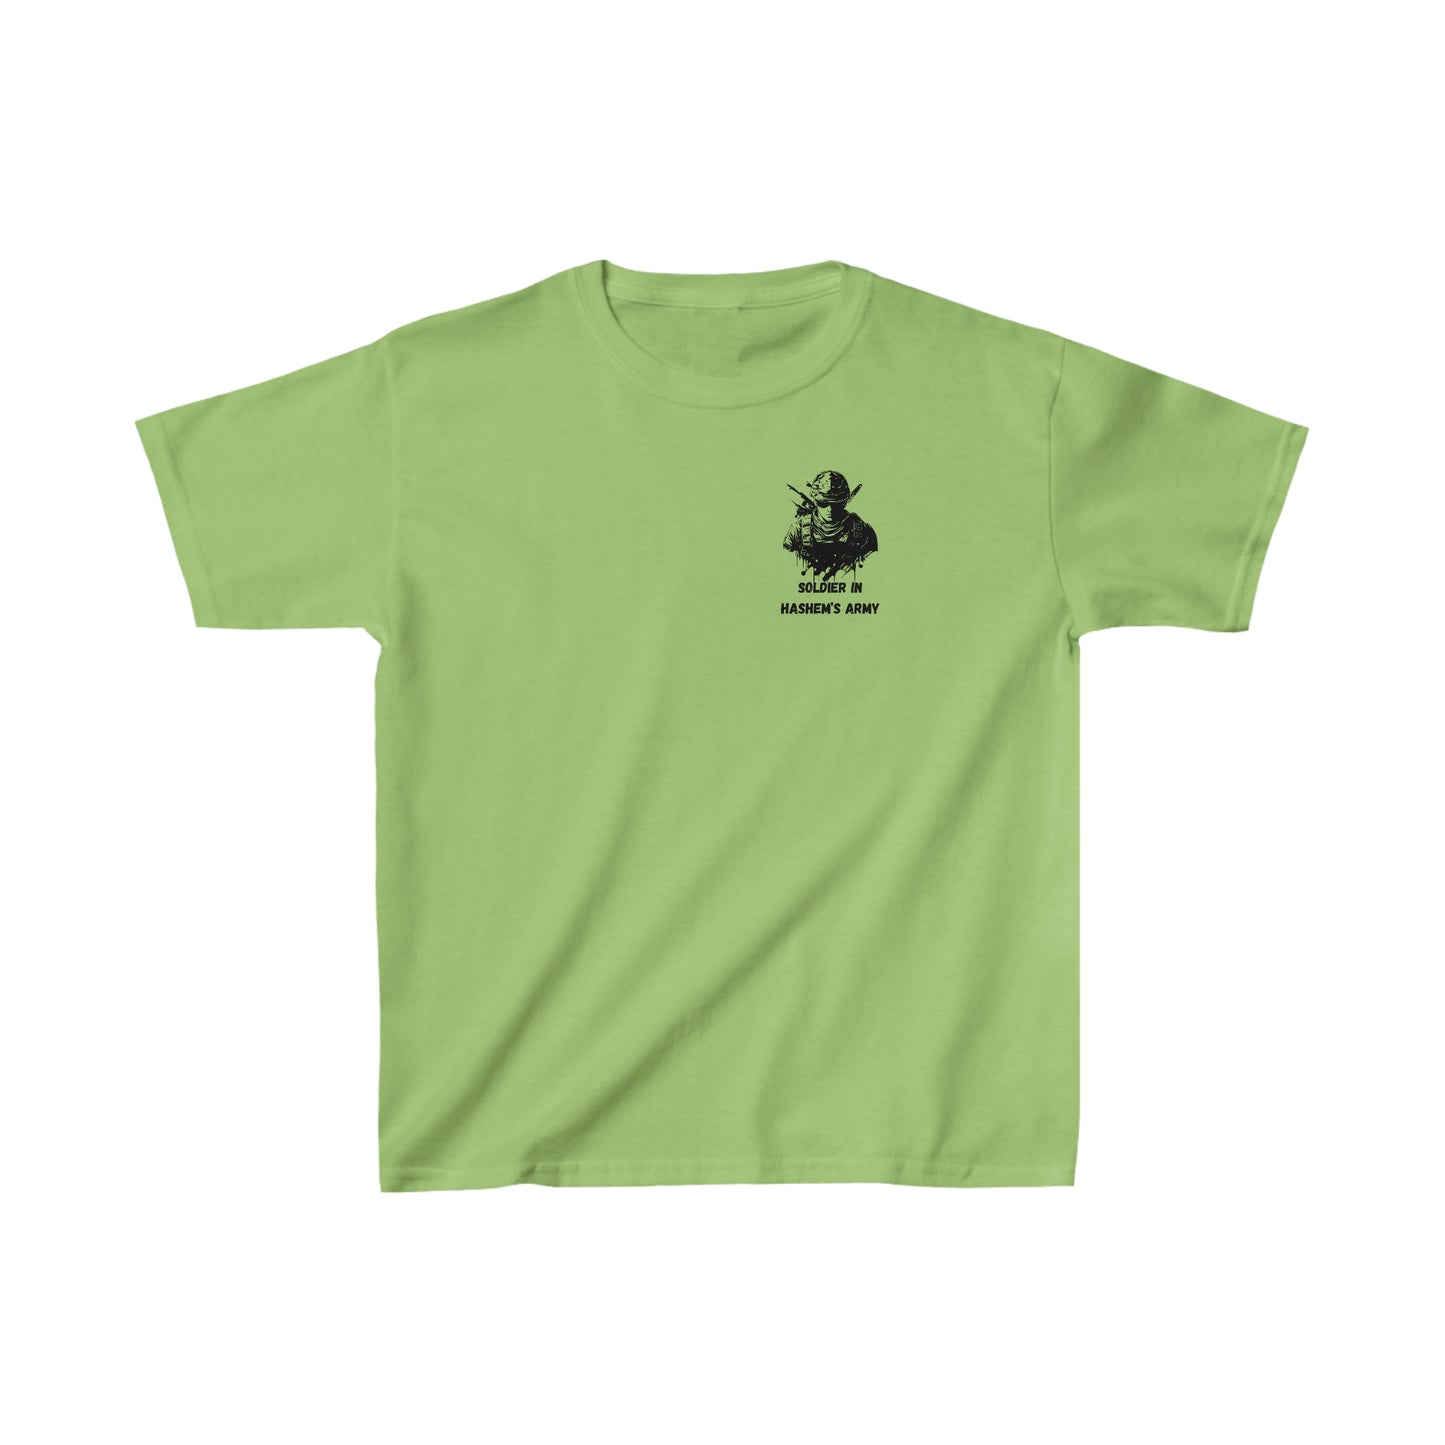 Boys' Soldier in Hashem's Army small image short sleeve t-shirt